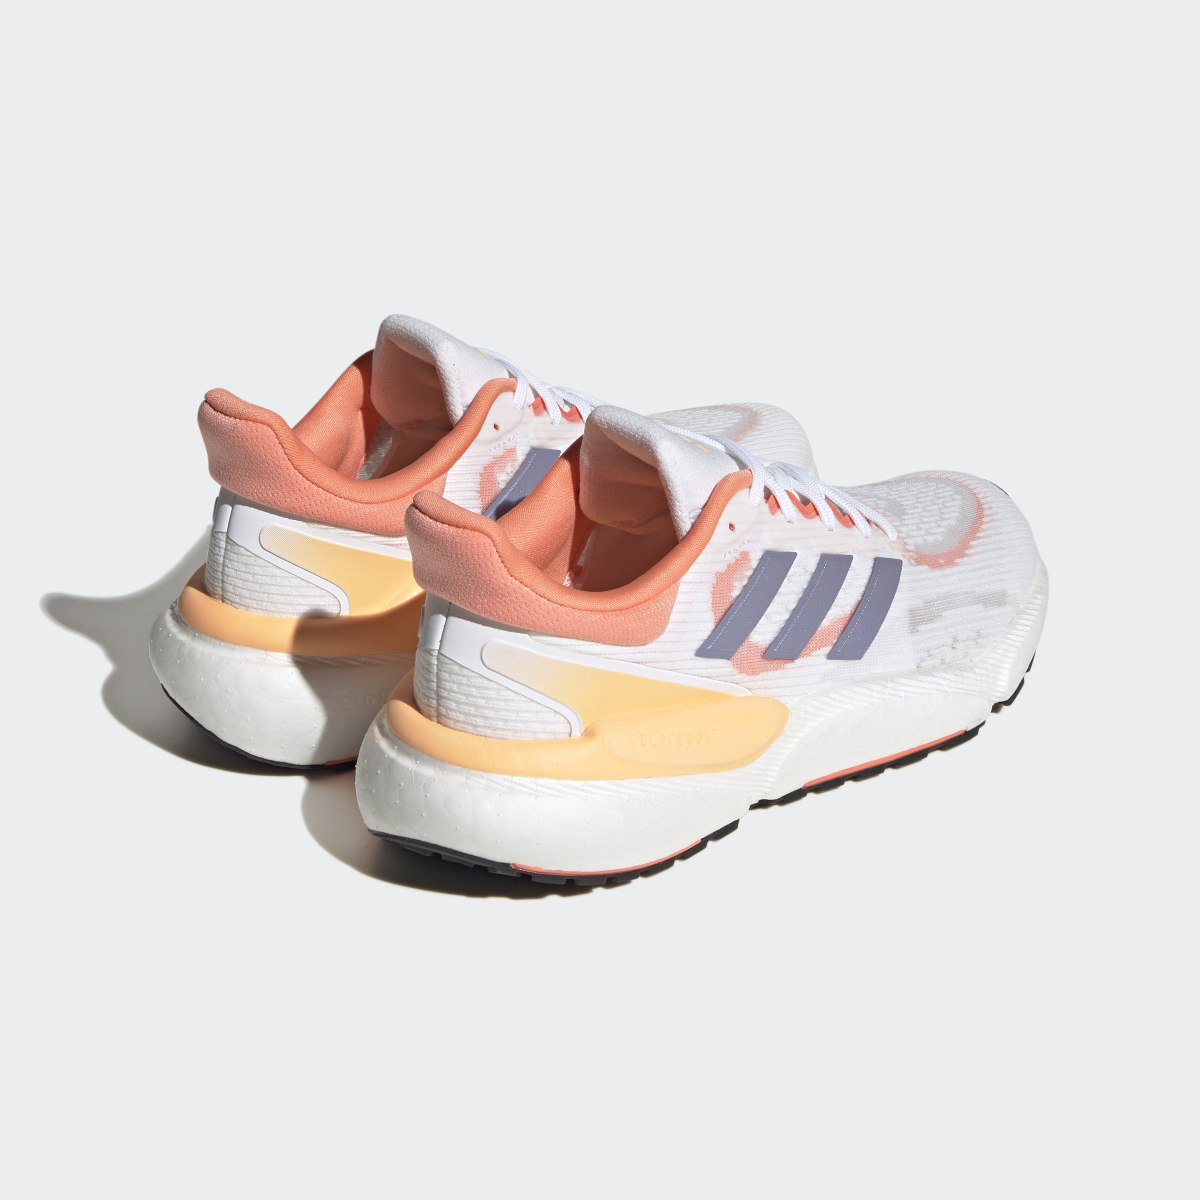 Adidas Solarboost 5 Shoes. 9